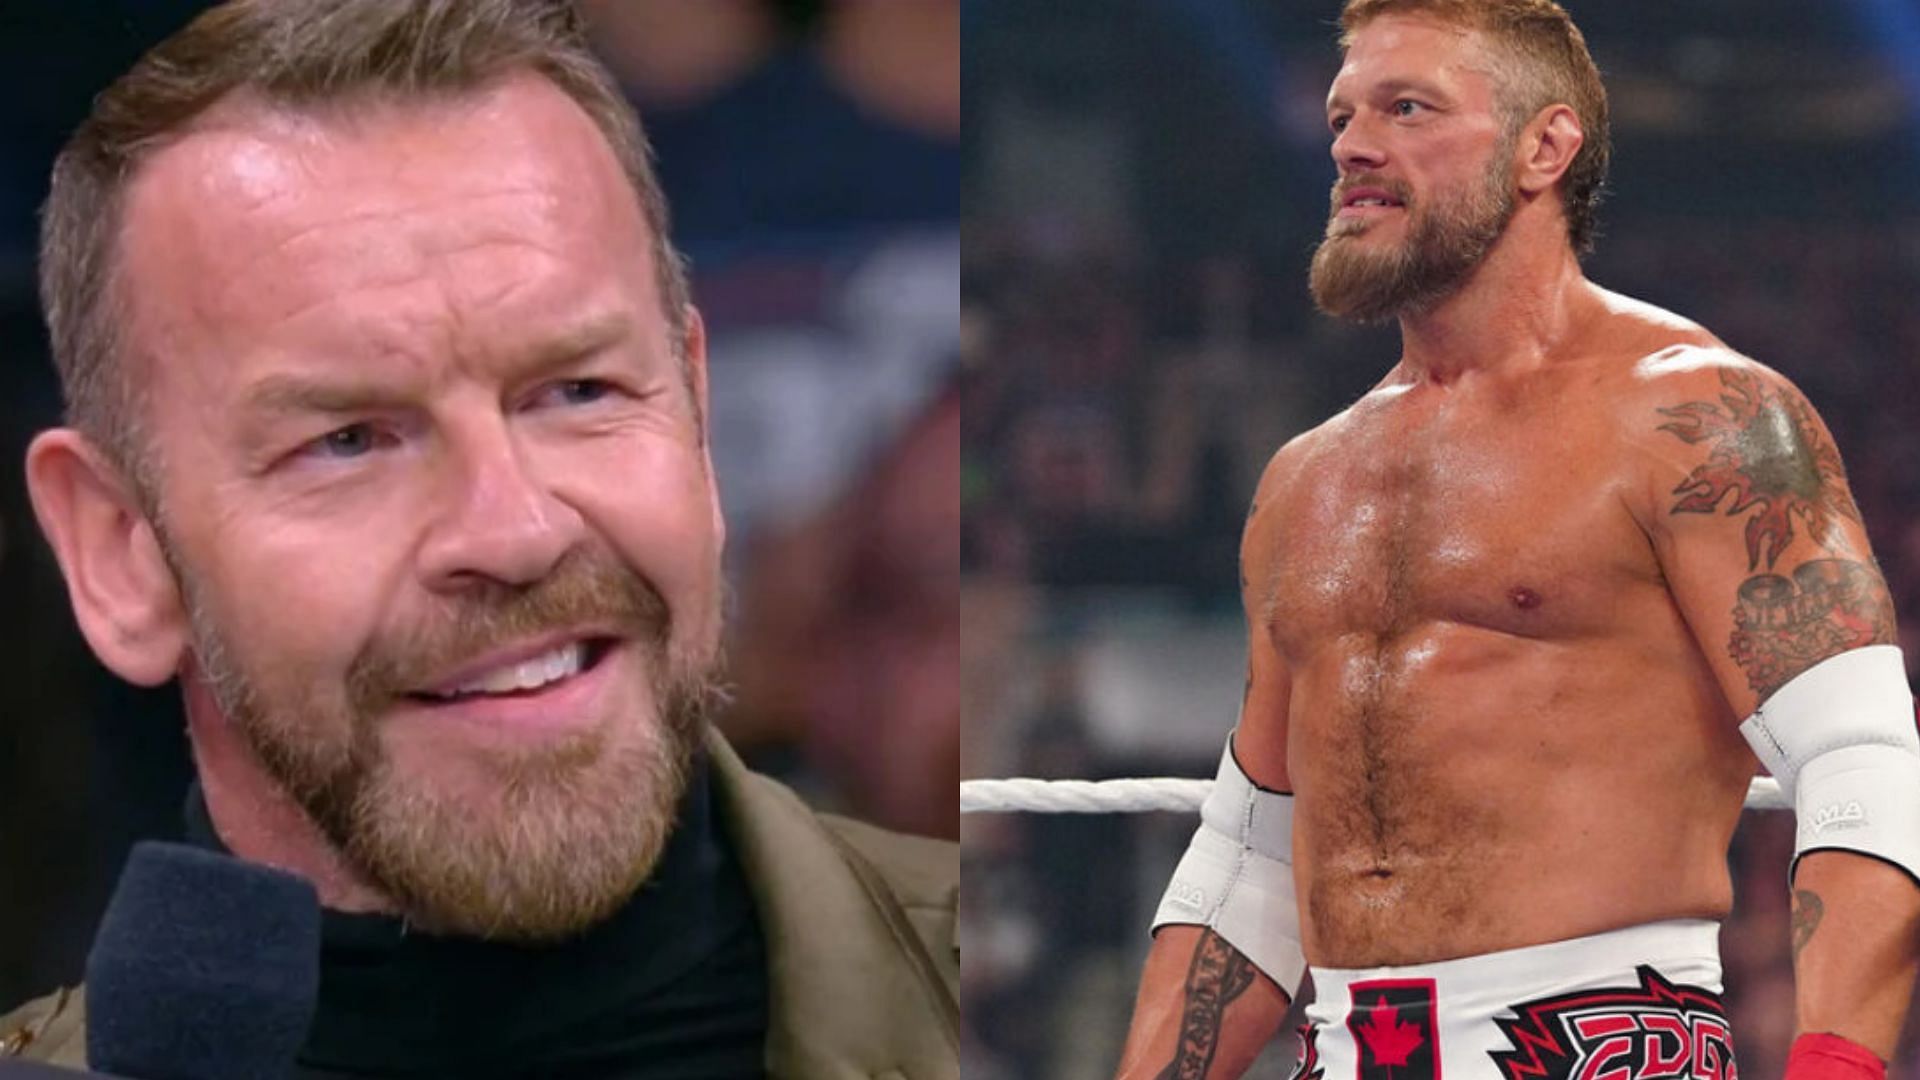 Edge and Christian are multi time WWE Tag team Champions